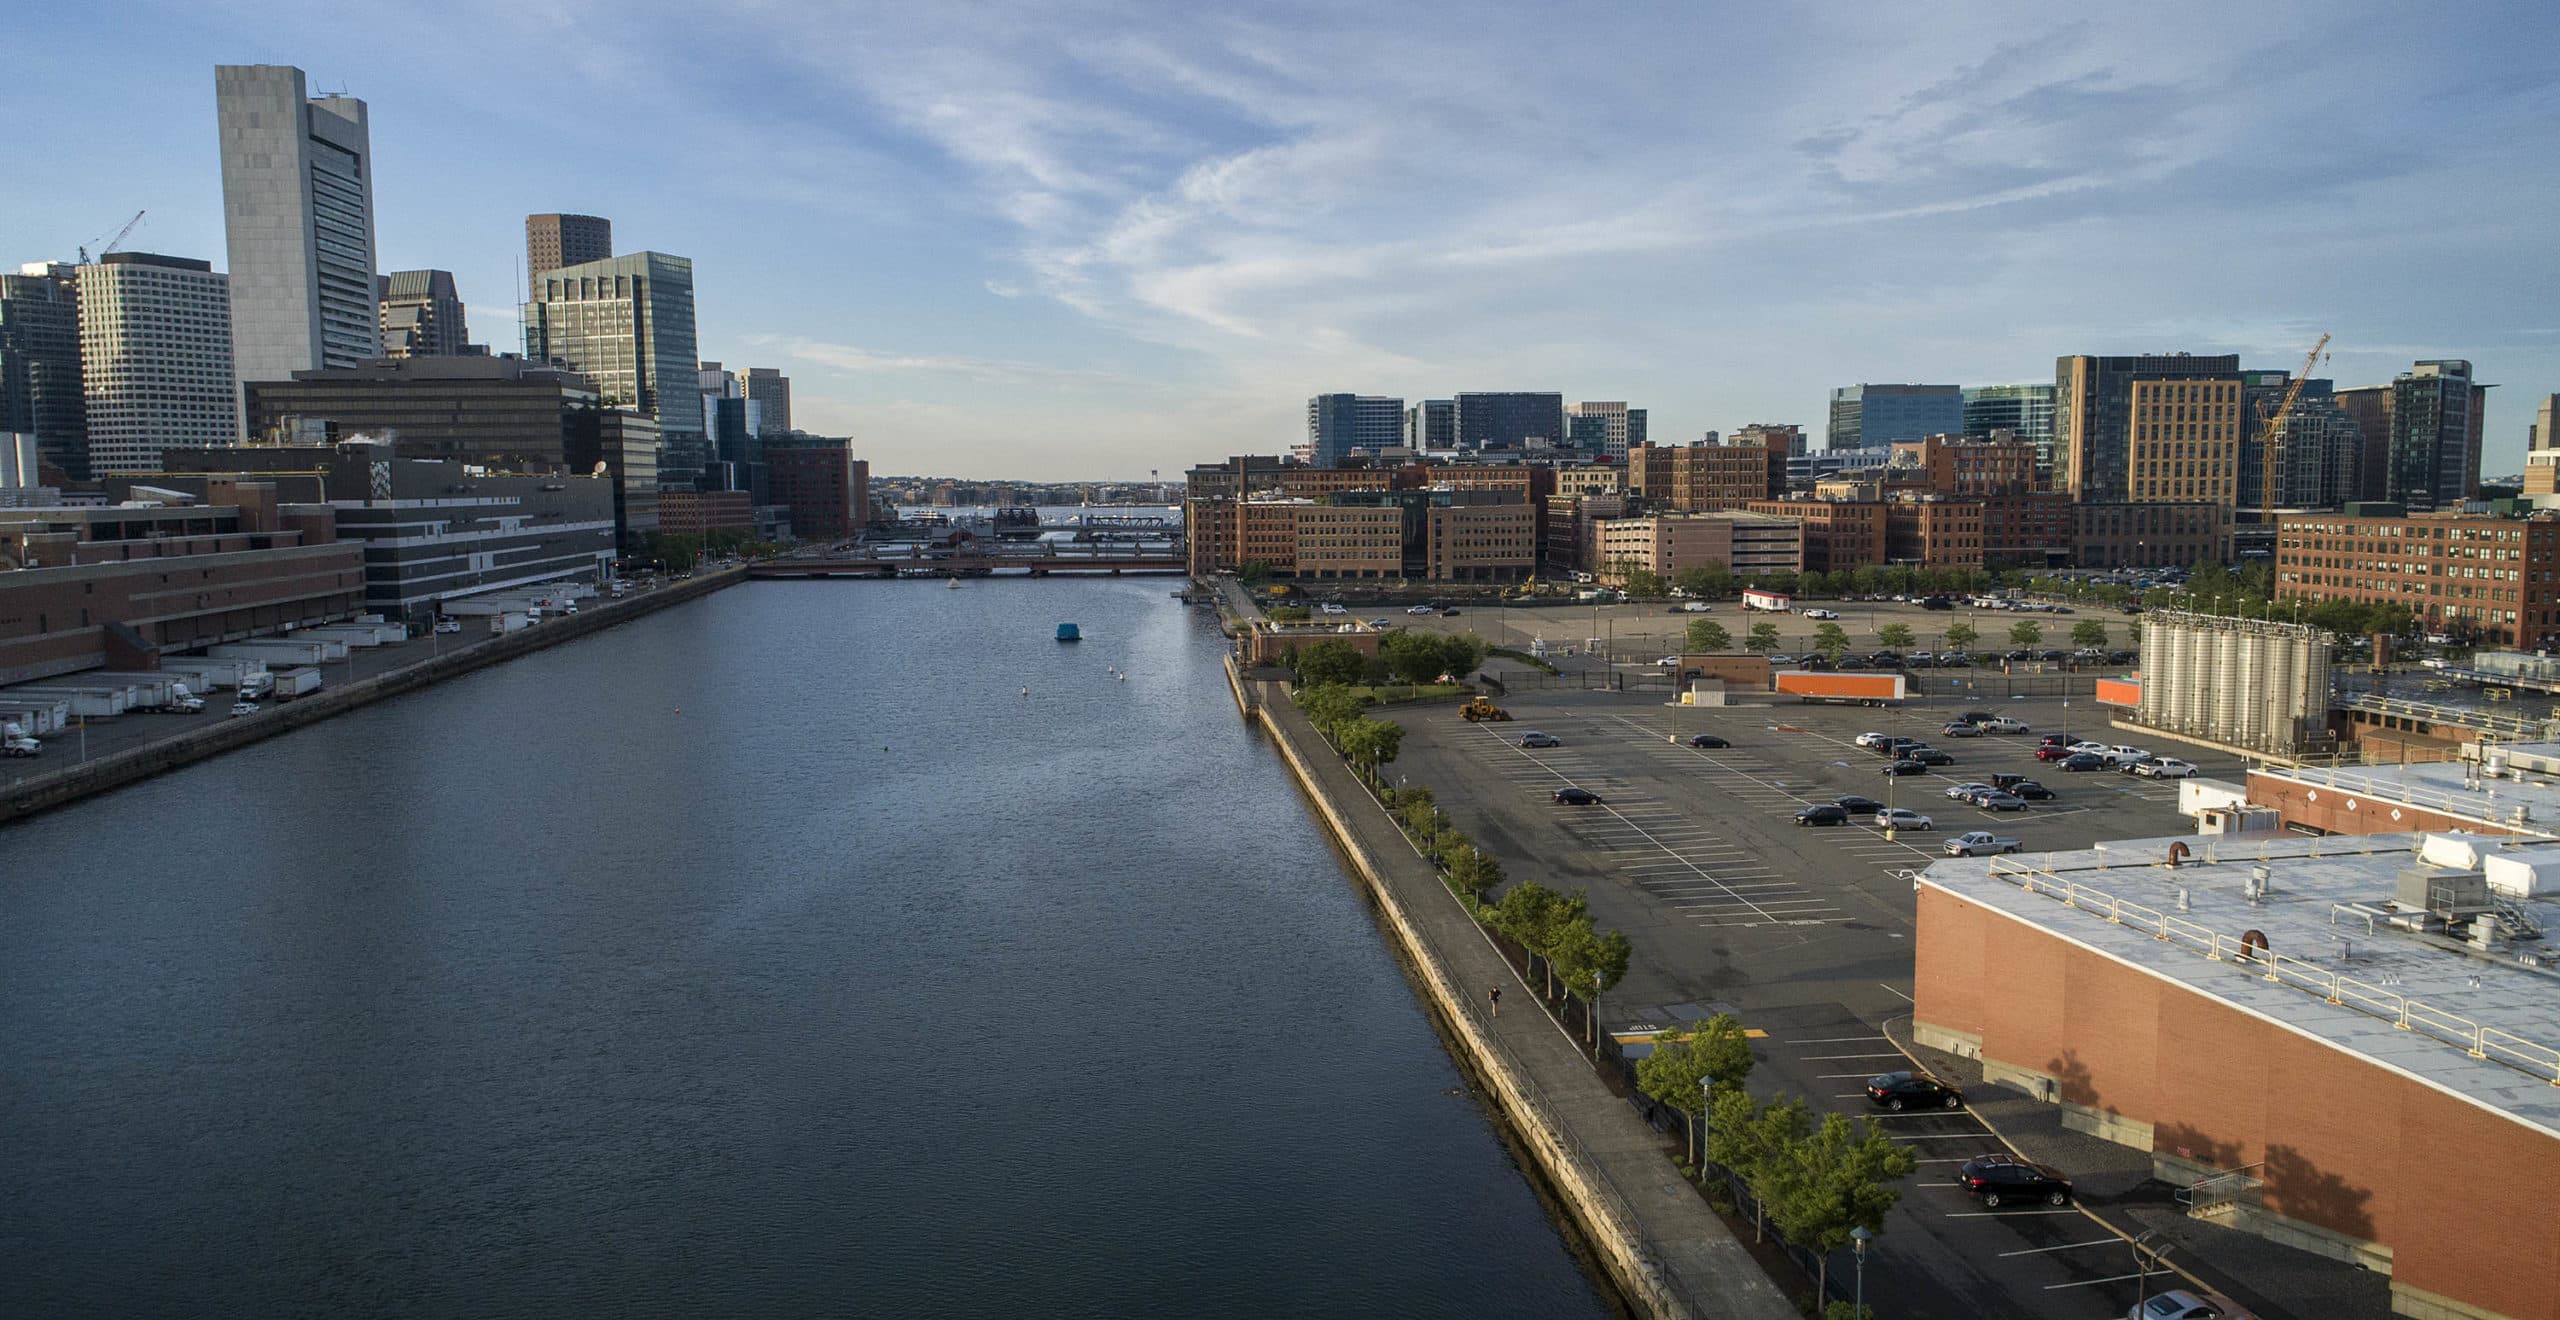 The Harborwalk along the Fort Point Channel from Gillette headquarters looking towards the Seaport. Two projects in the works will raise the Harborwalk to create a berm to hold back high water. (Robin Lubbock/WBUR)